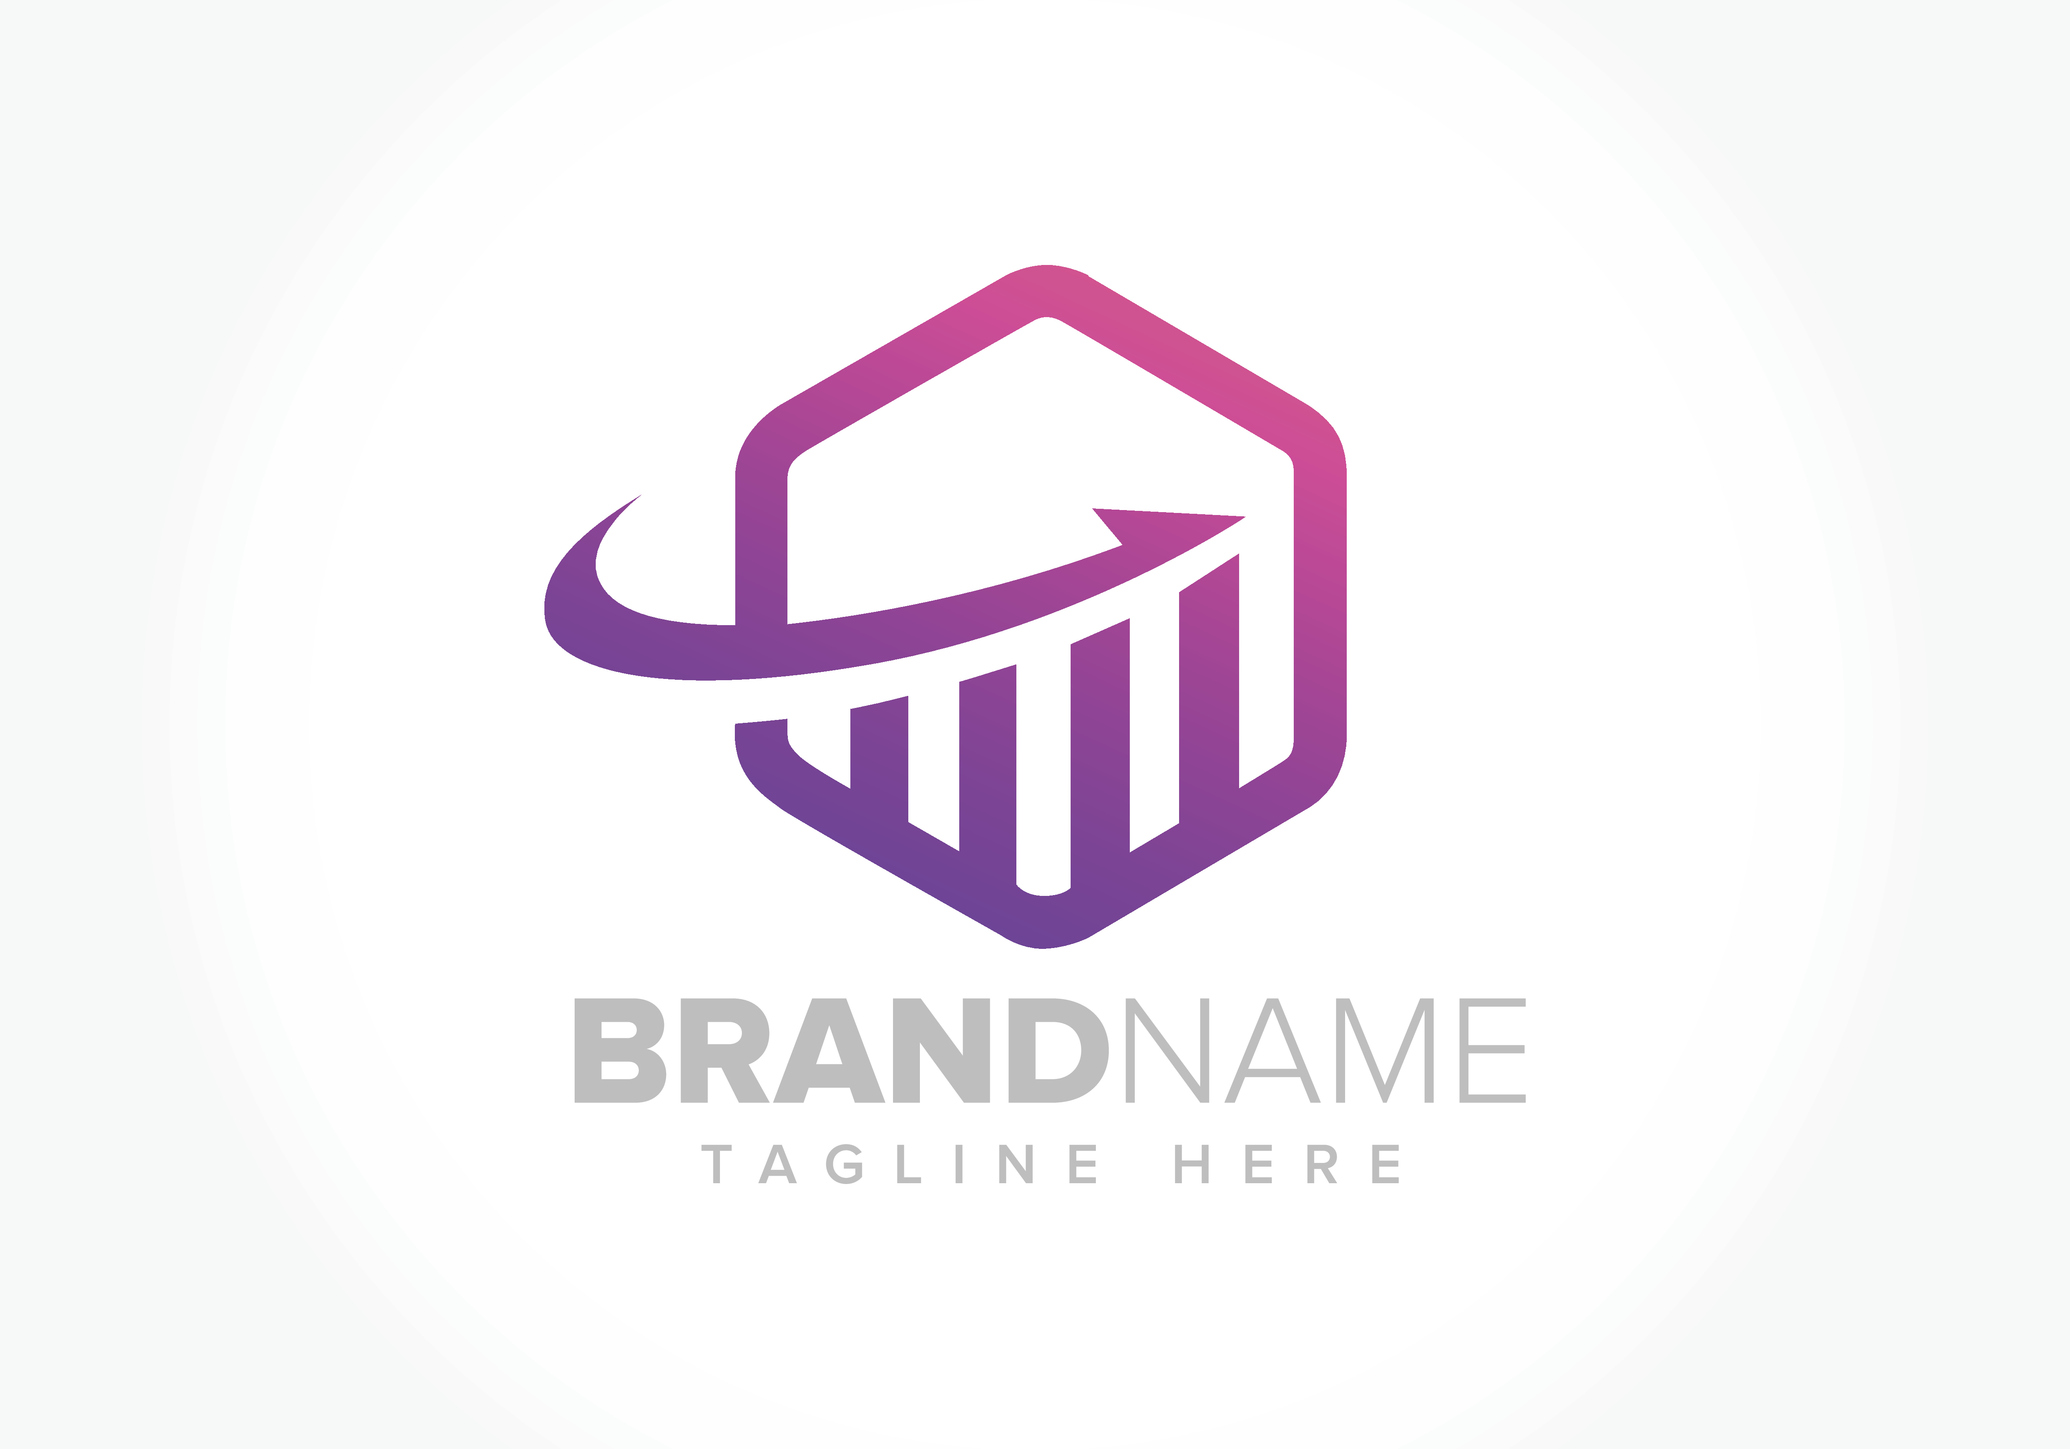 How Important Is A Logo Design For A Startup Business? by Jacpac